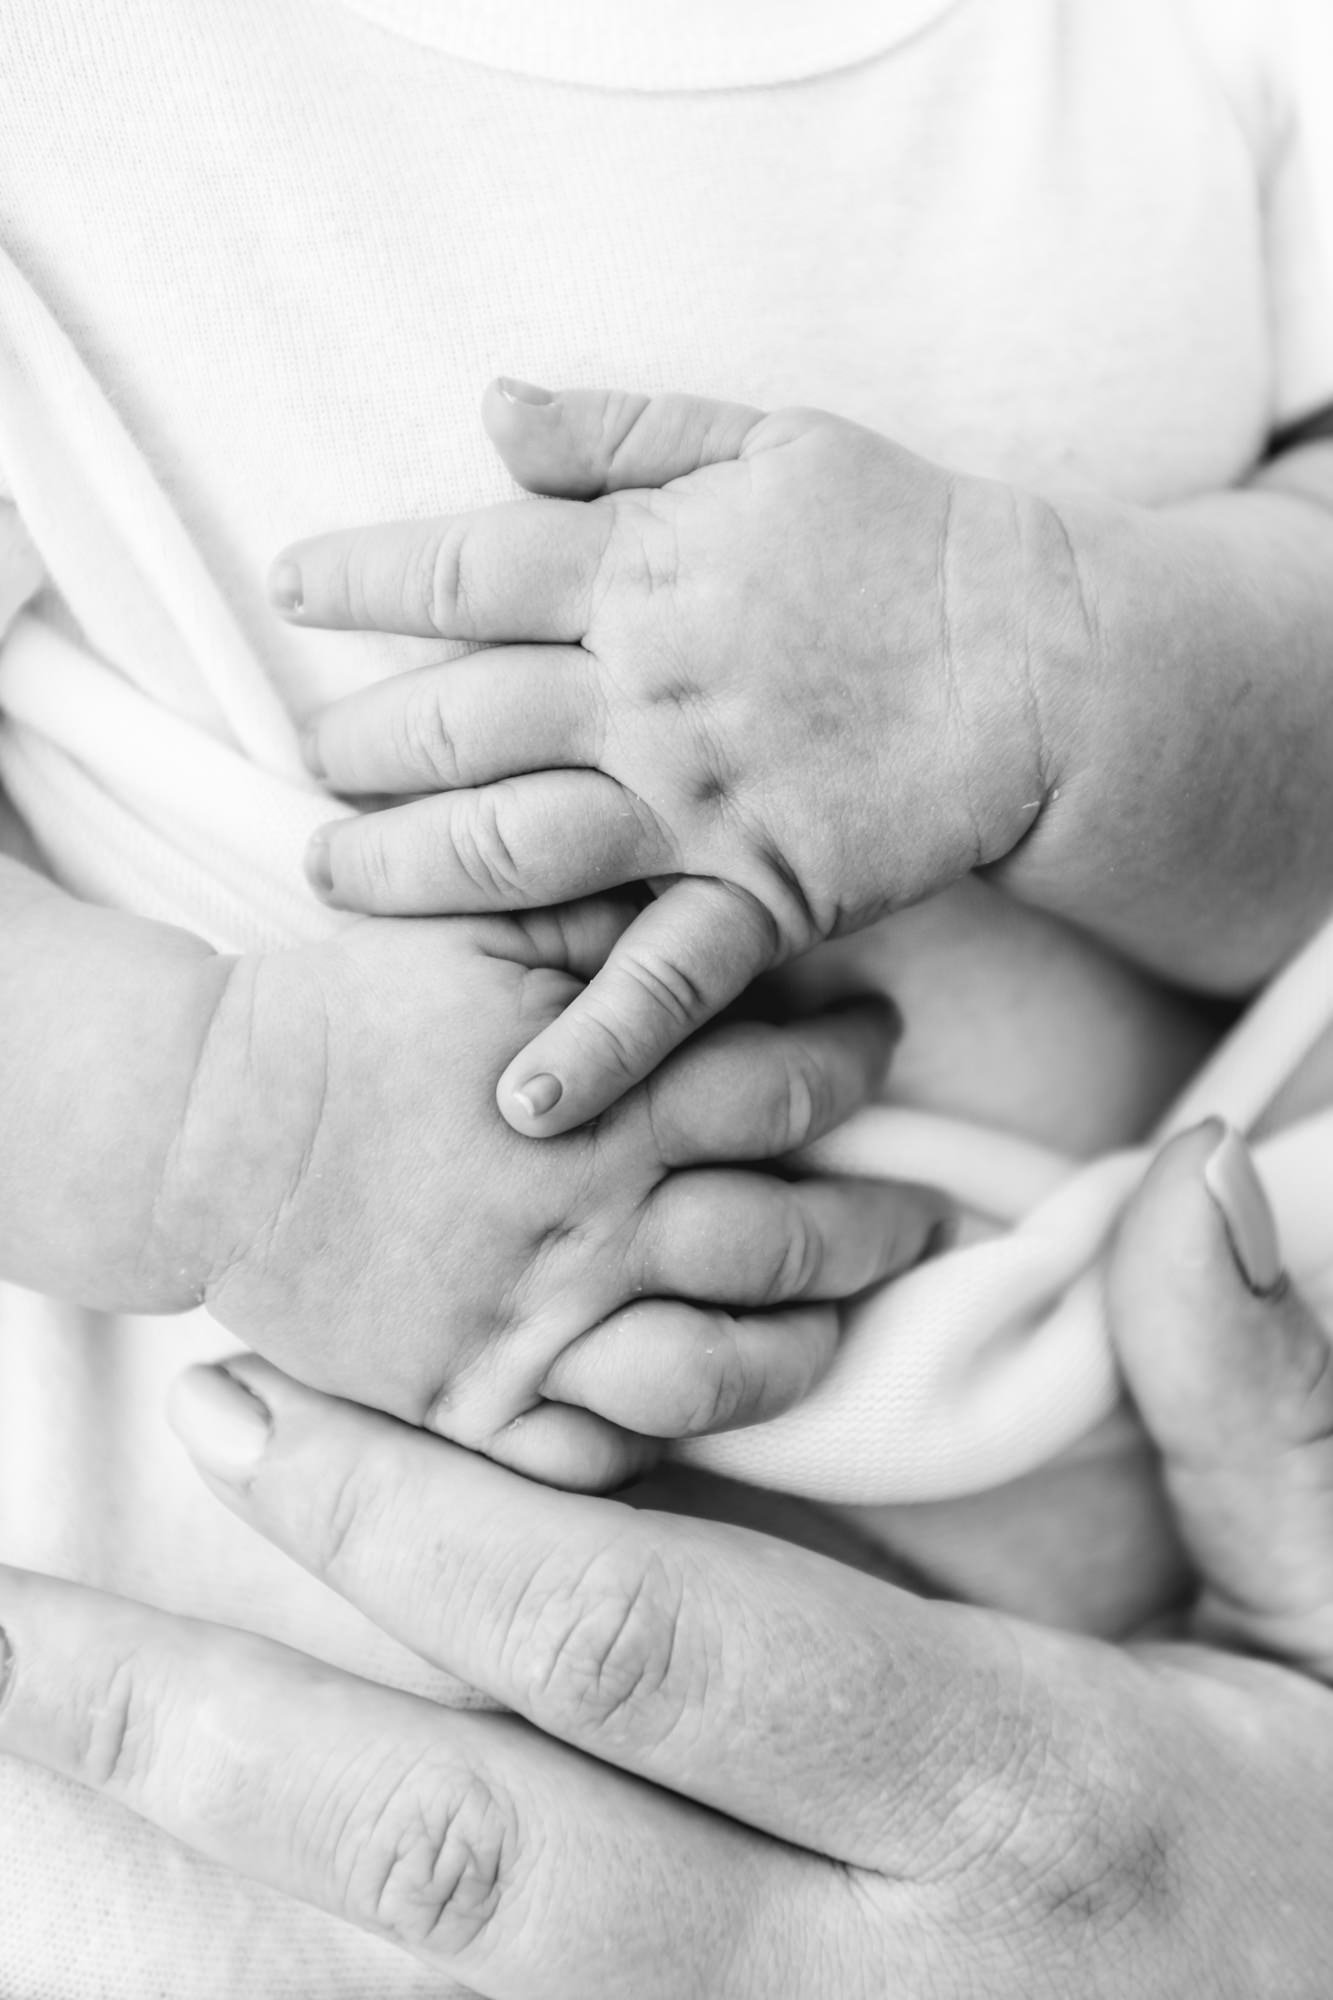  The most adorable baby hands in classic black and white photo. Mom places hand over baby’s stomach. Sweet baby dimples in hands in photo captured by Nicole Hawkins Photography. #newbornportraits #newbornstudioshoots #NewJerseyPhotographers #NJfamily